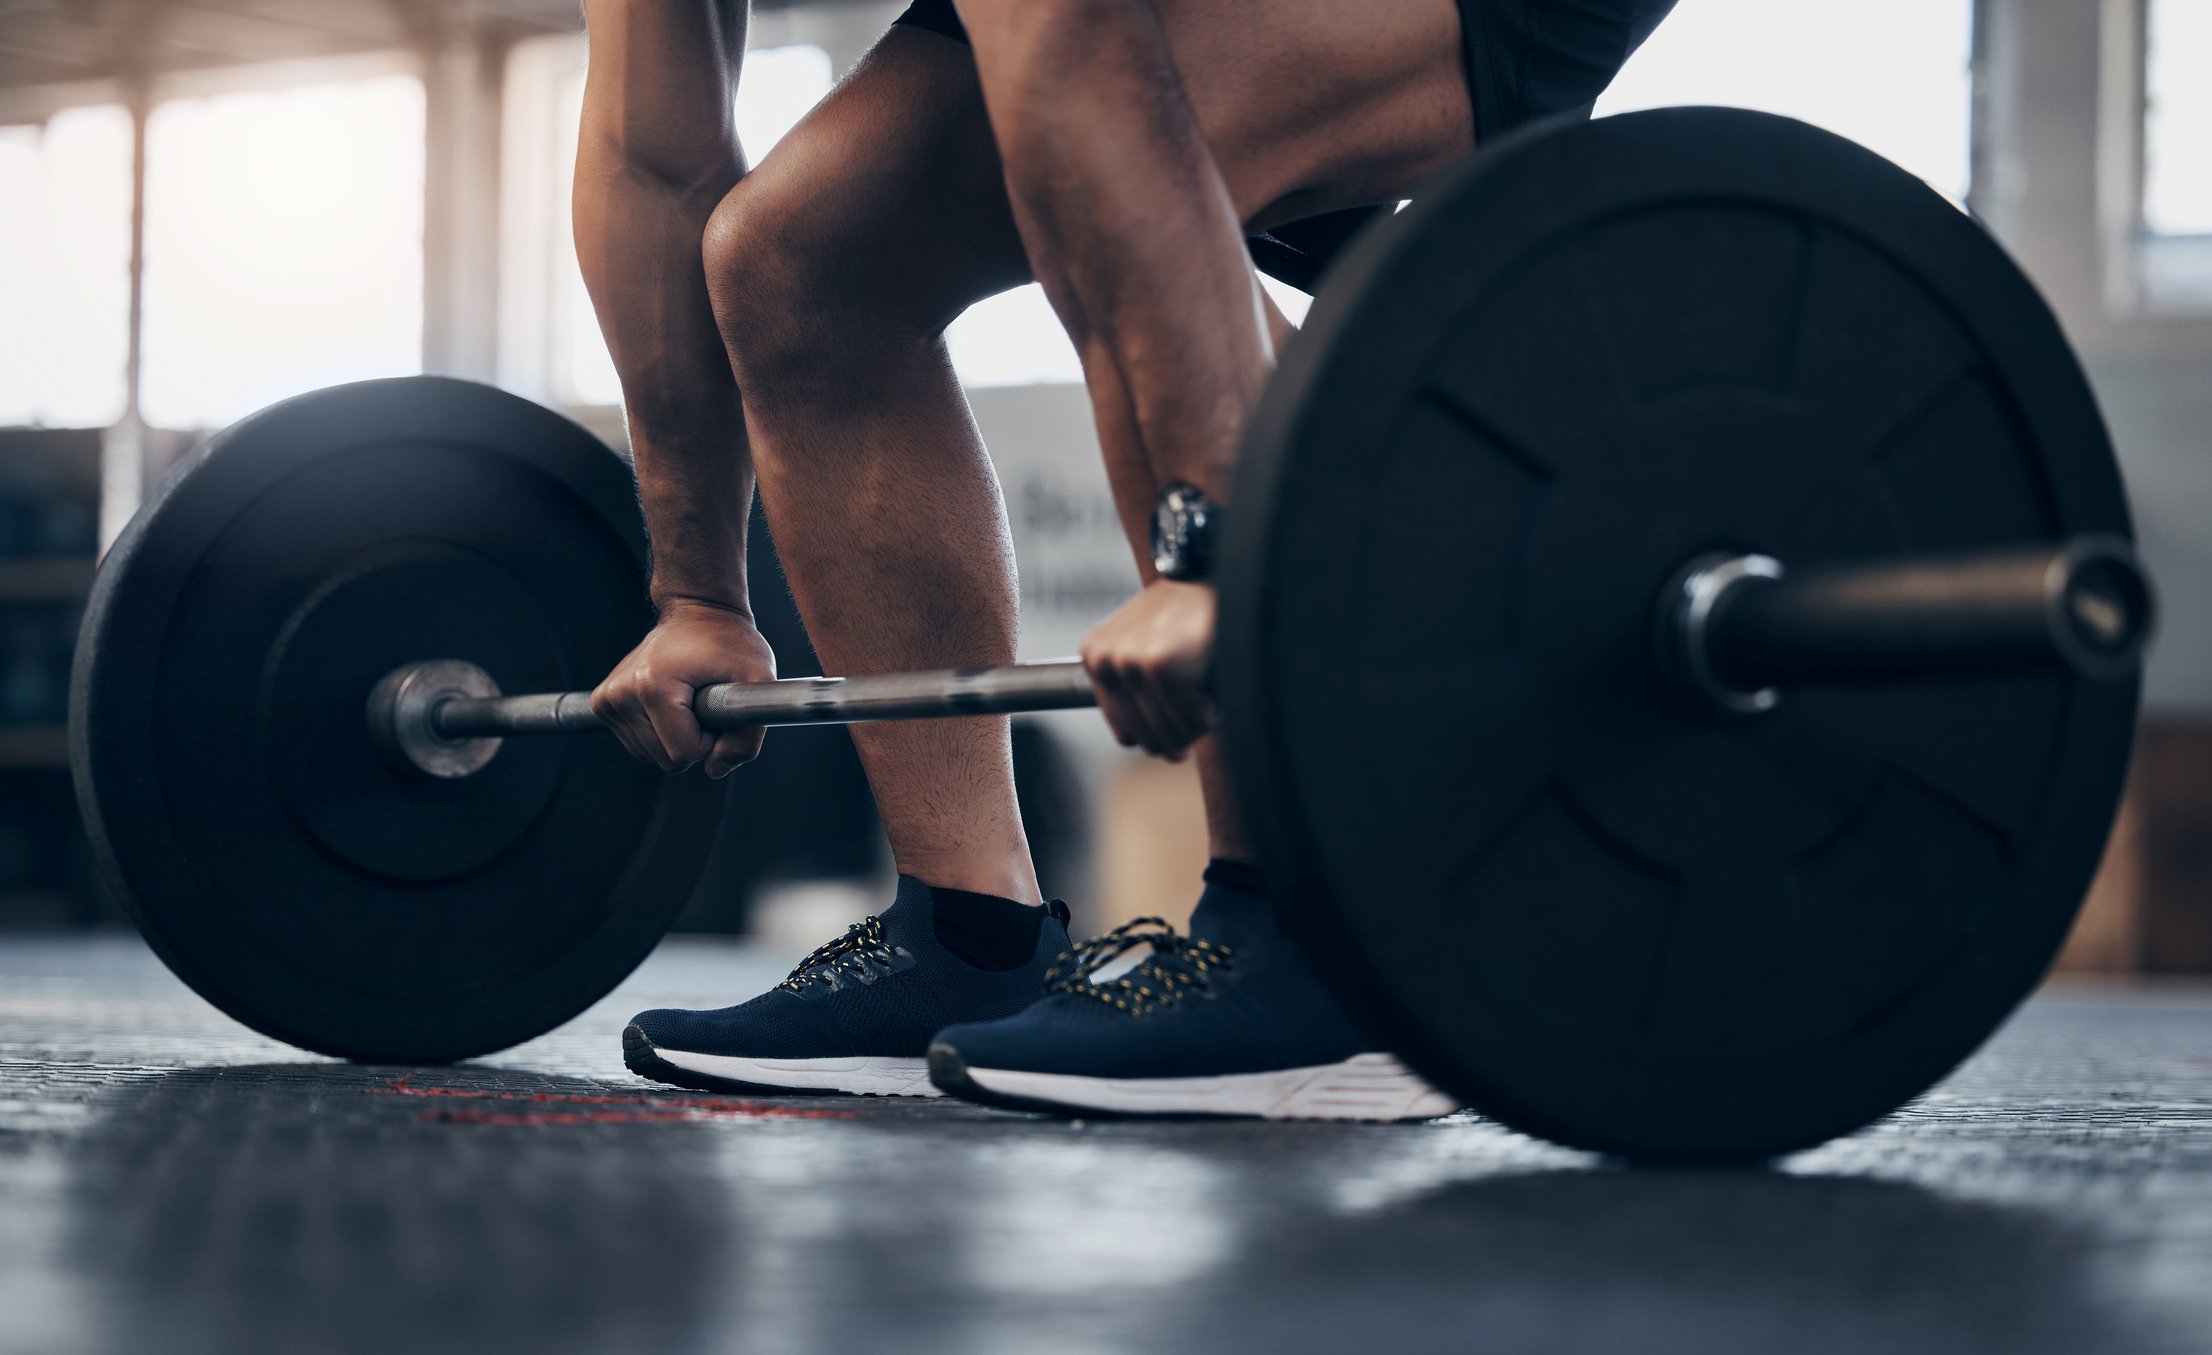 5 Reasons Why Working Out in Synthetics Is Bad for Your Health